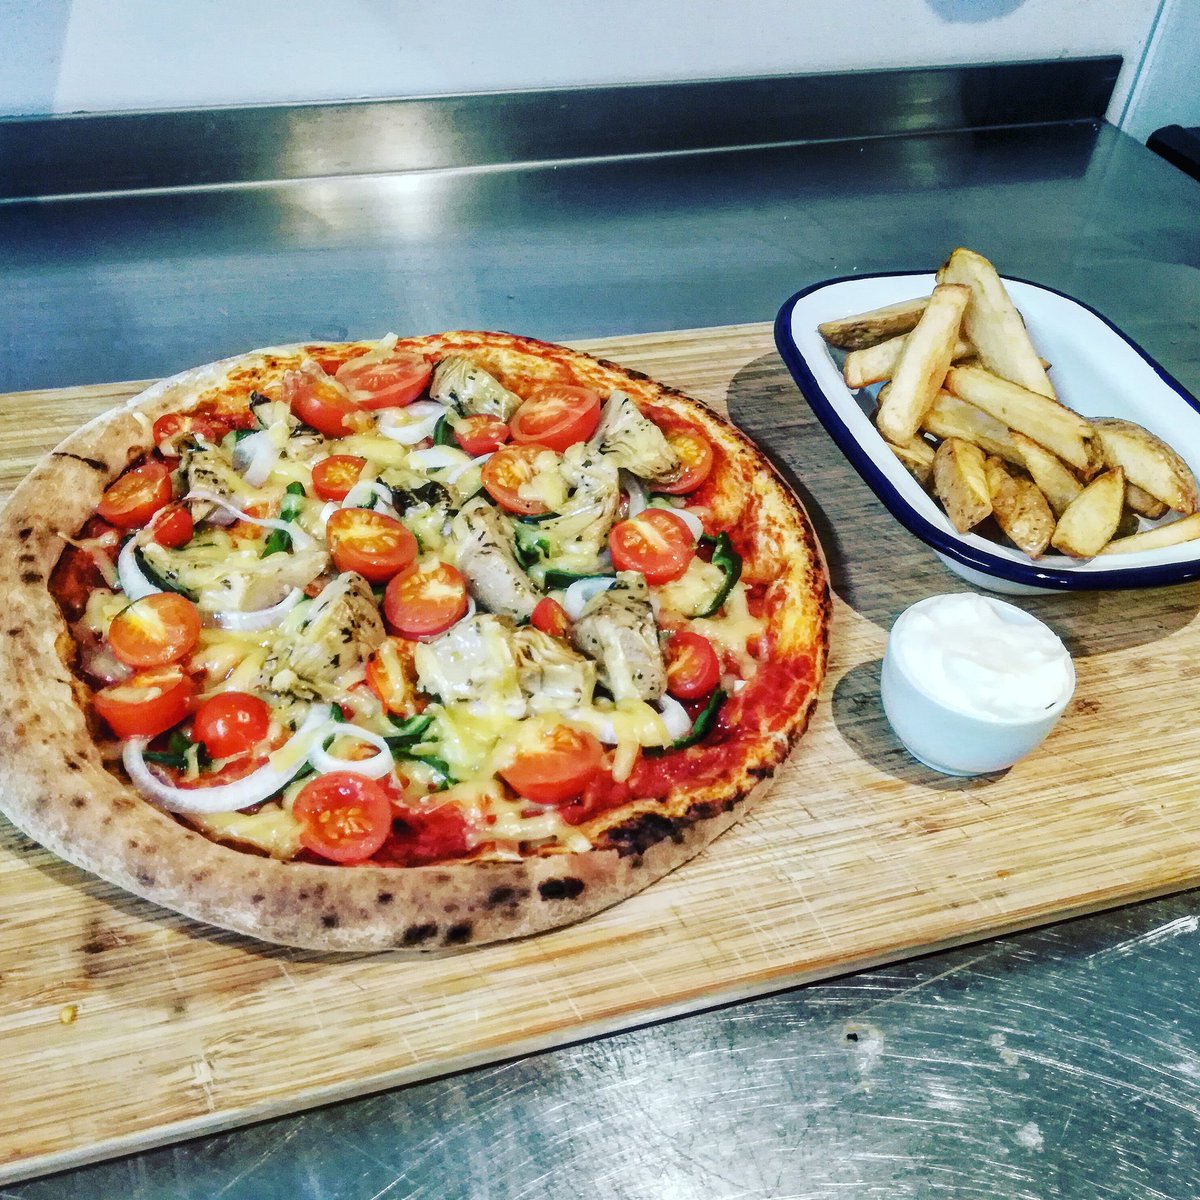 #homemade #pizza with @crostamollica #pizzabase... Topped with homegrown! #greenpeppers and #cherrytomatoes with @ViolifeFoods #maturecheese also with homemade #mayo and #handcut #chips #veganfood #vegan #veganeating #plantbased #whatveganseat #leckertastyandvegan #veganlife